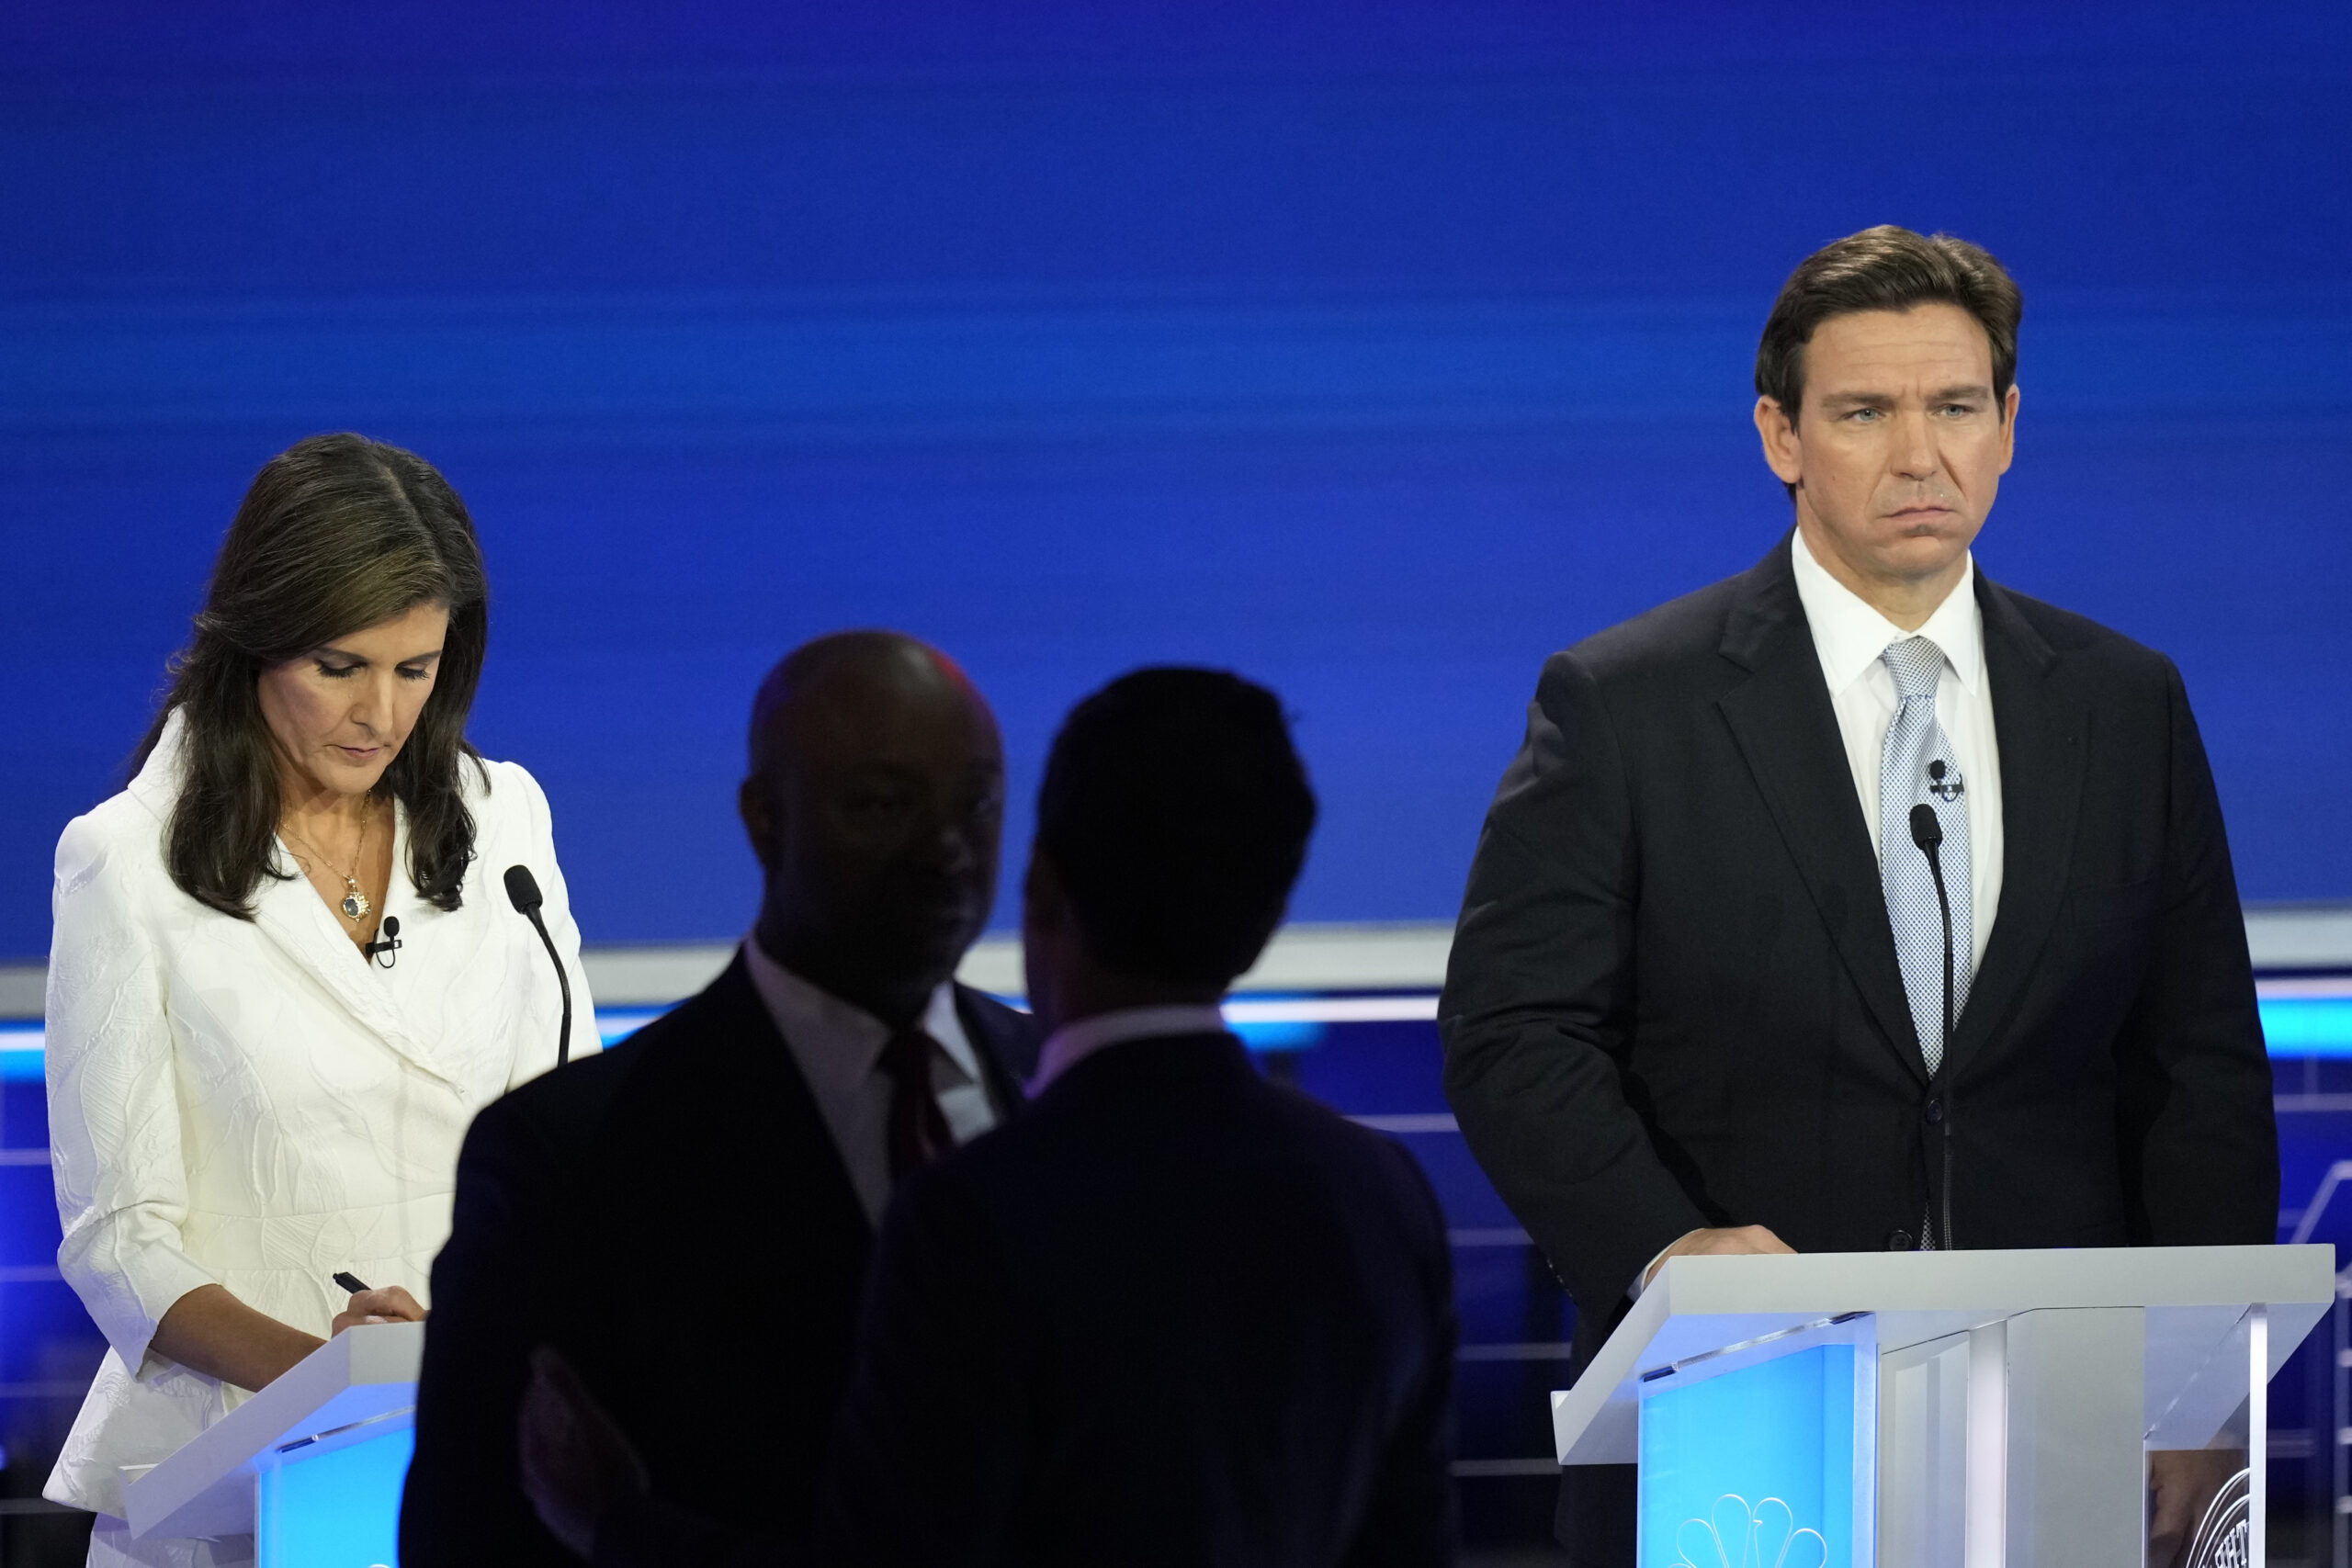 Haley and DeSantis Super PACs Have Spent Millions Attacking Each Other, But Next to Nothing on Trump